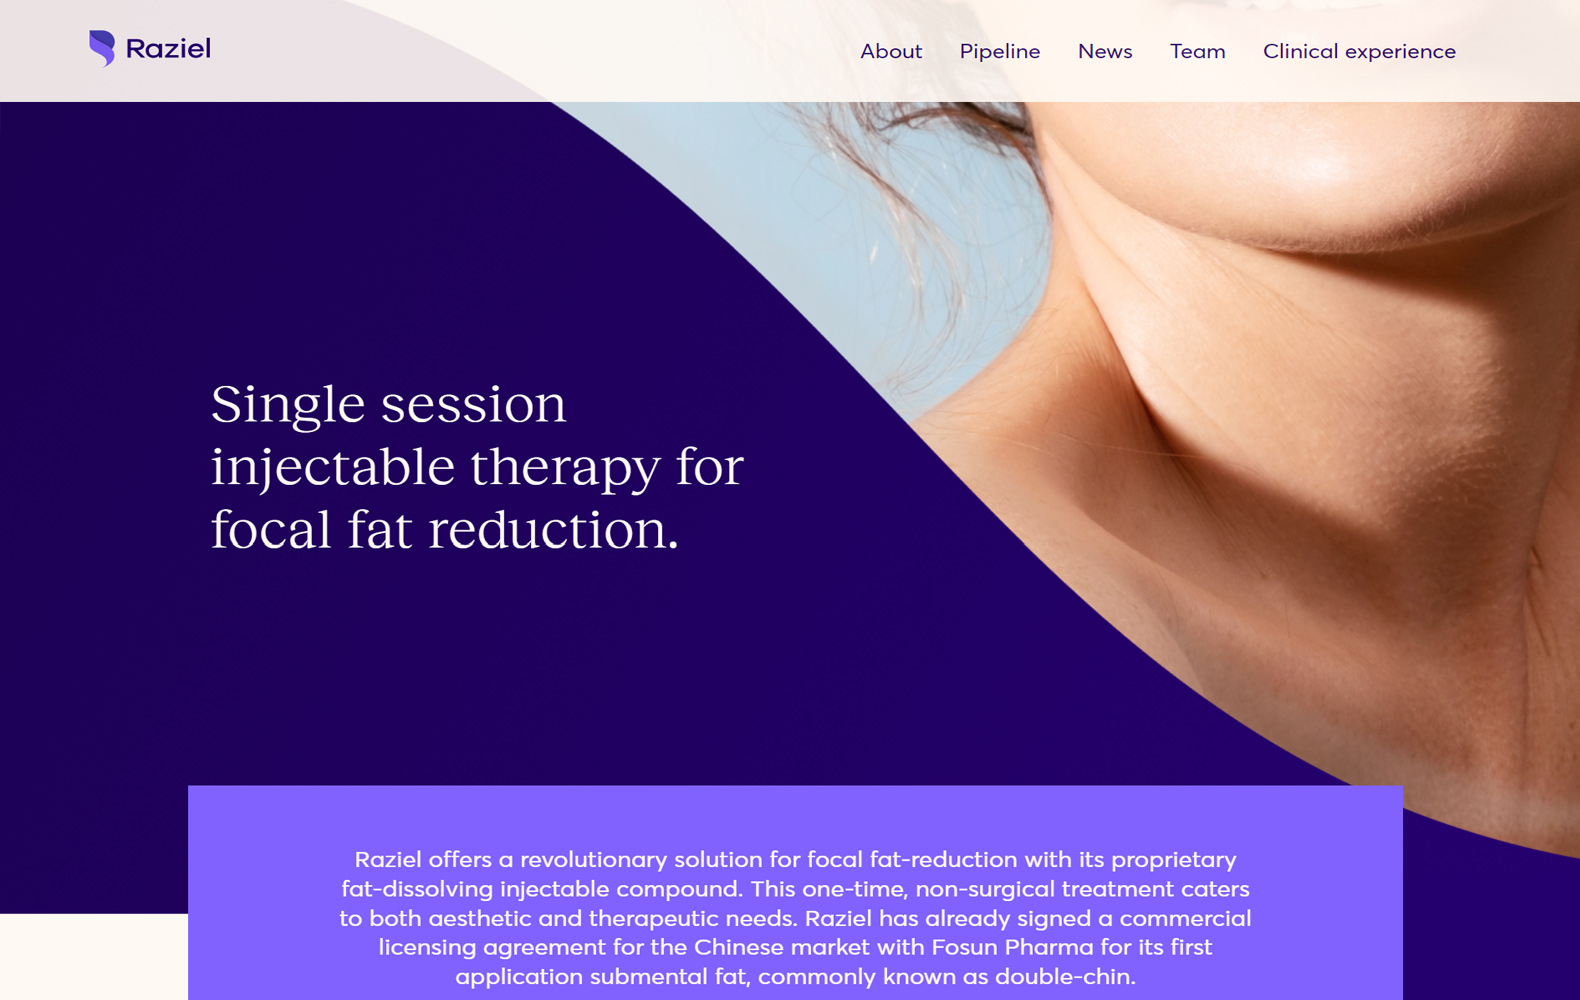 Raziel Therapy Revolutionary solution for focal fat reduction